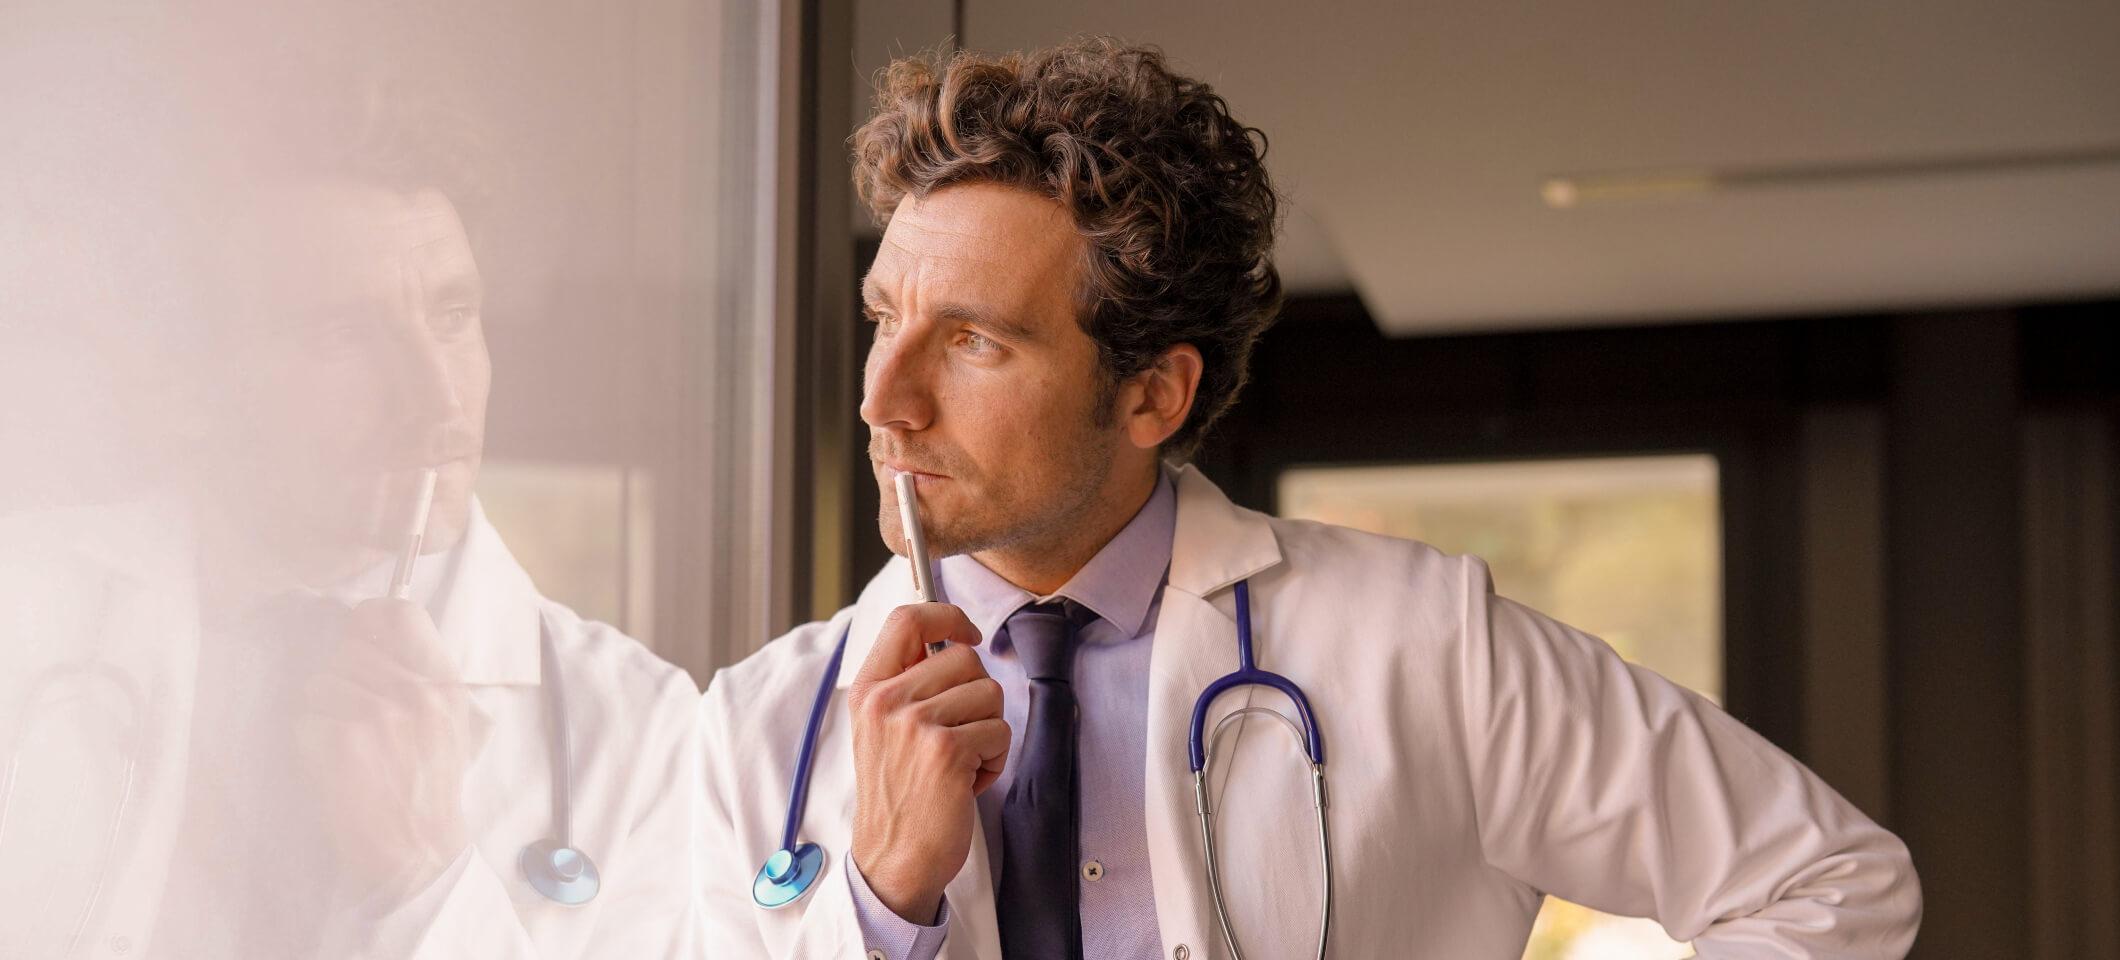 Doctor looks through window pondering solutions to physician burnout